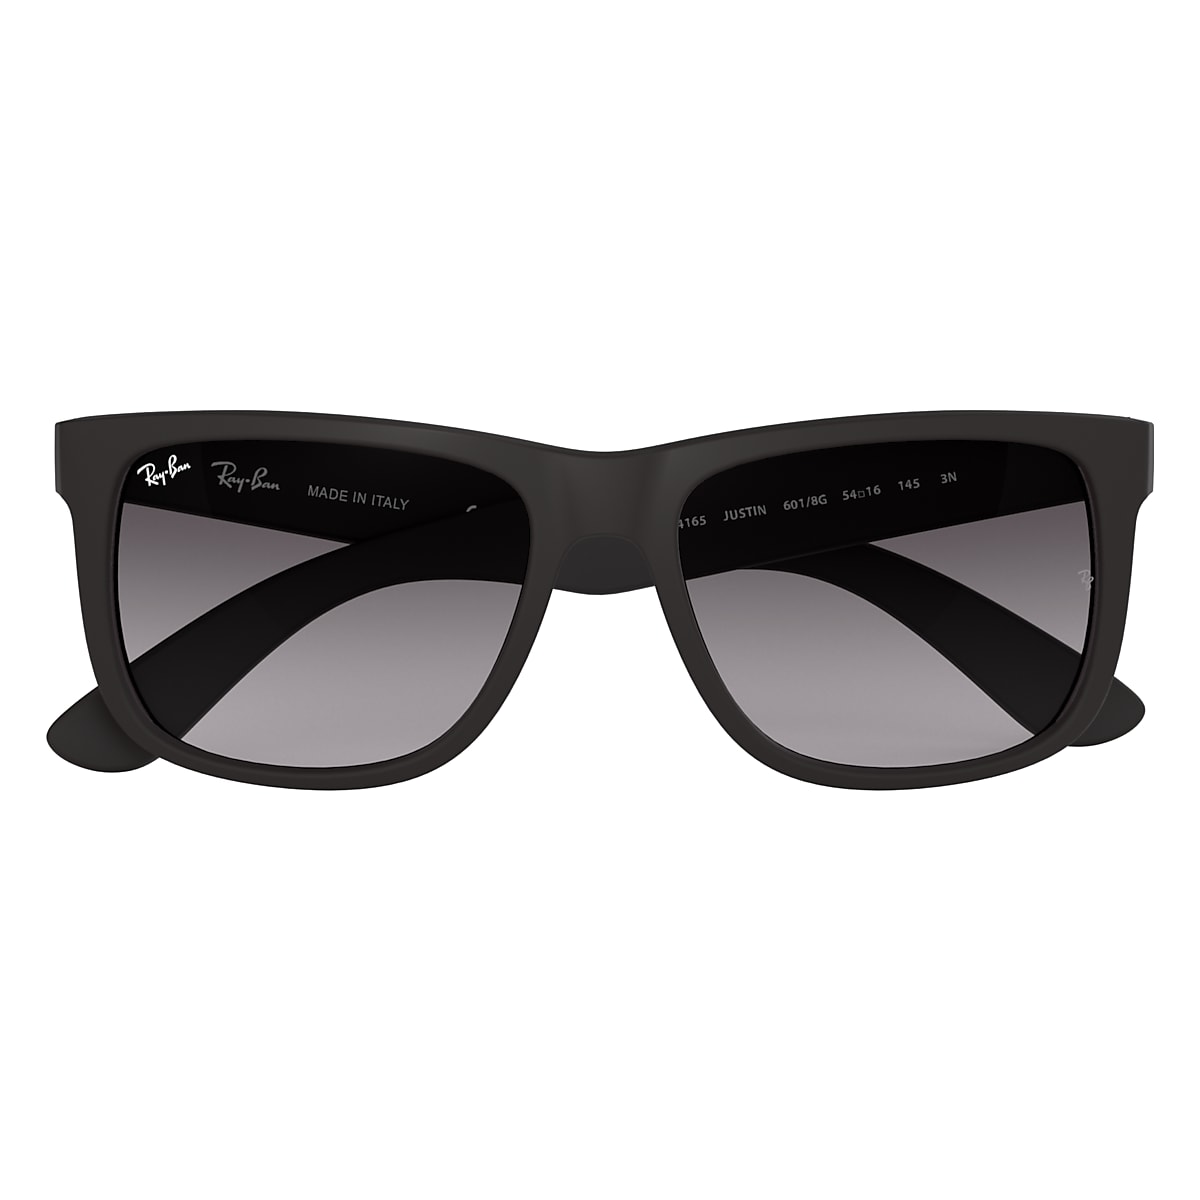 JUSTIN CLASSIC Sunglasses in Black and Dark Grey - RB4165 | Ray 